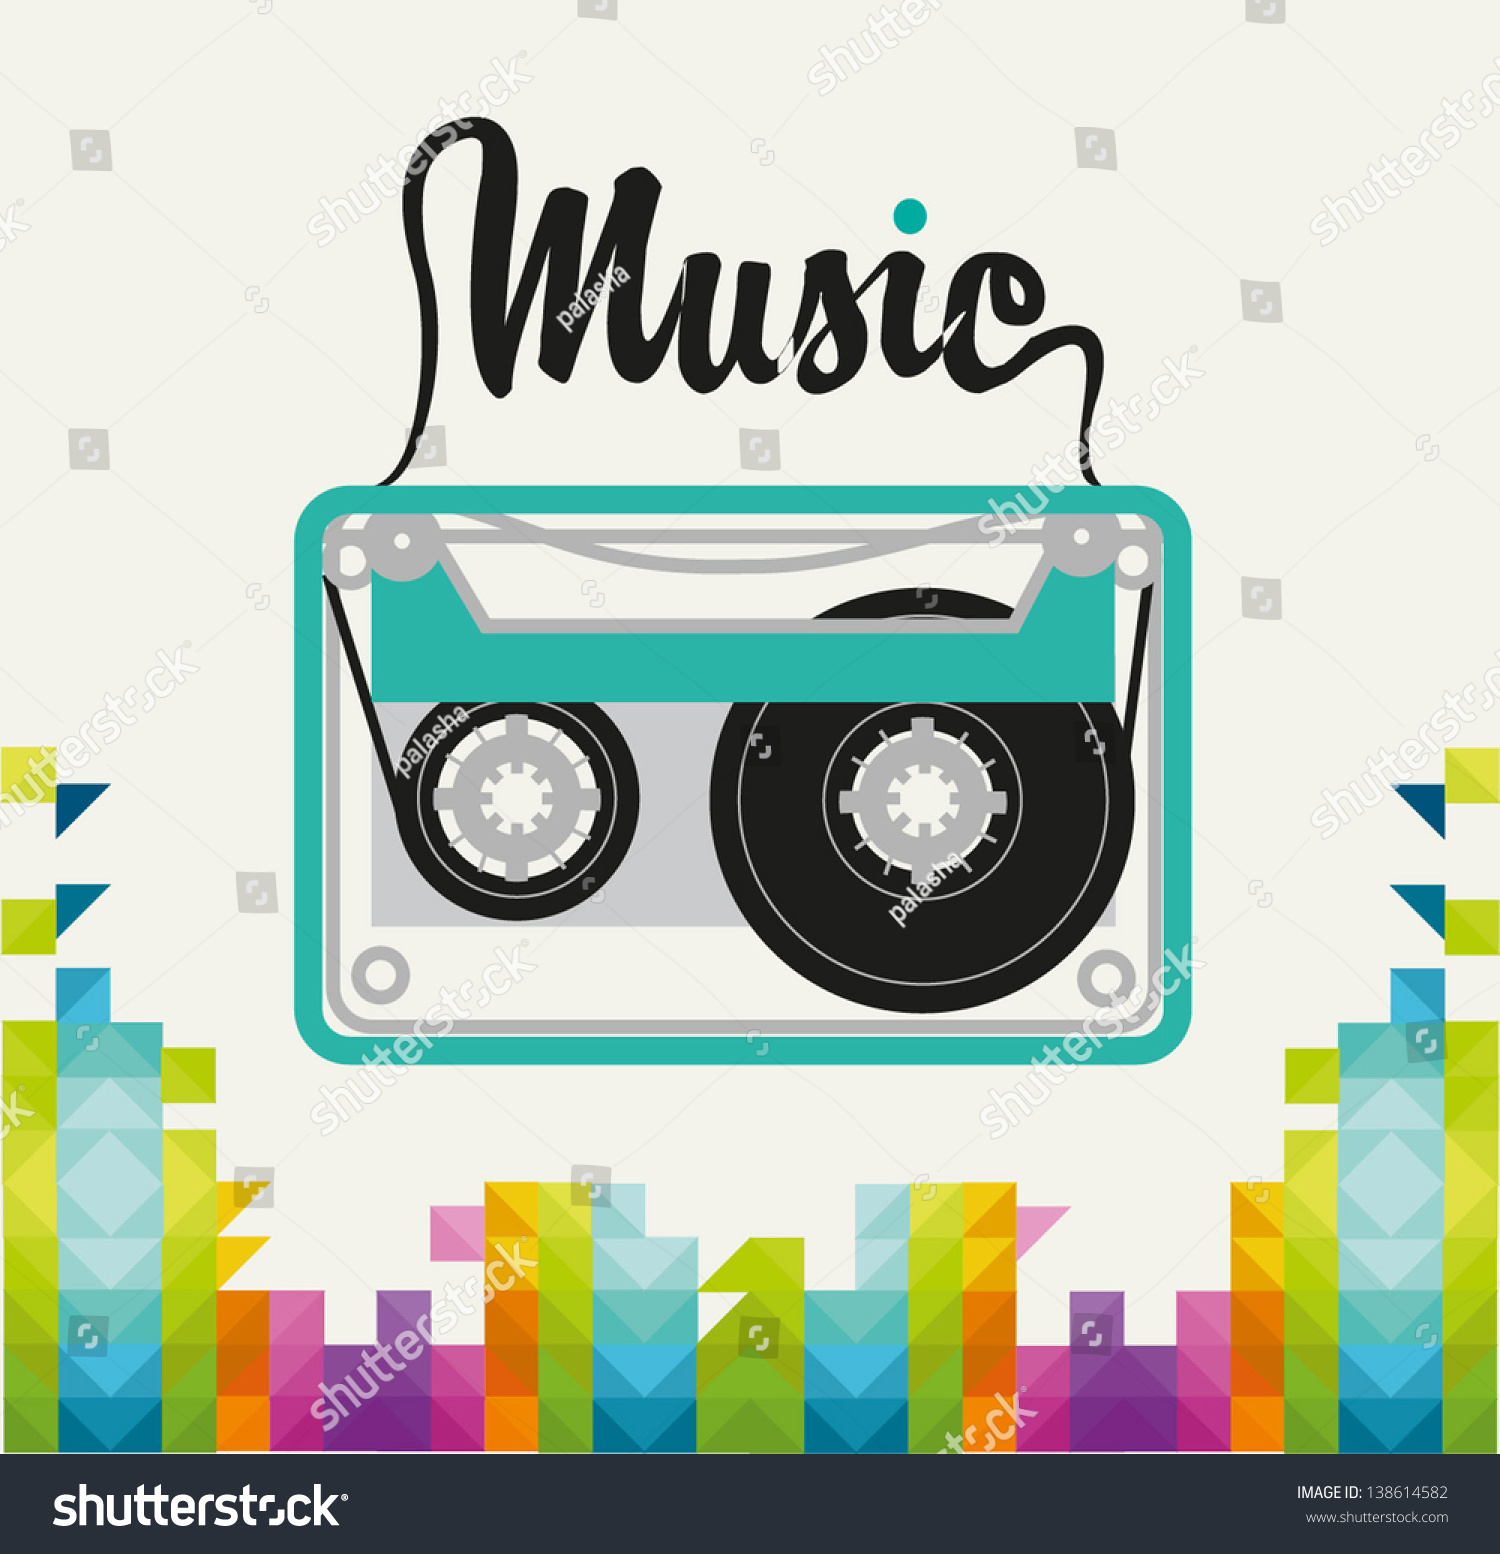 music clipart for word - photo #17